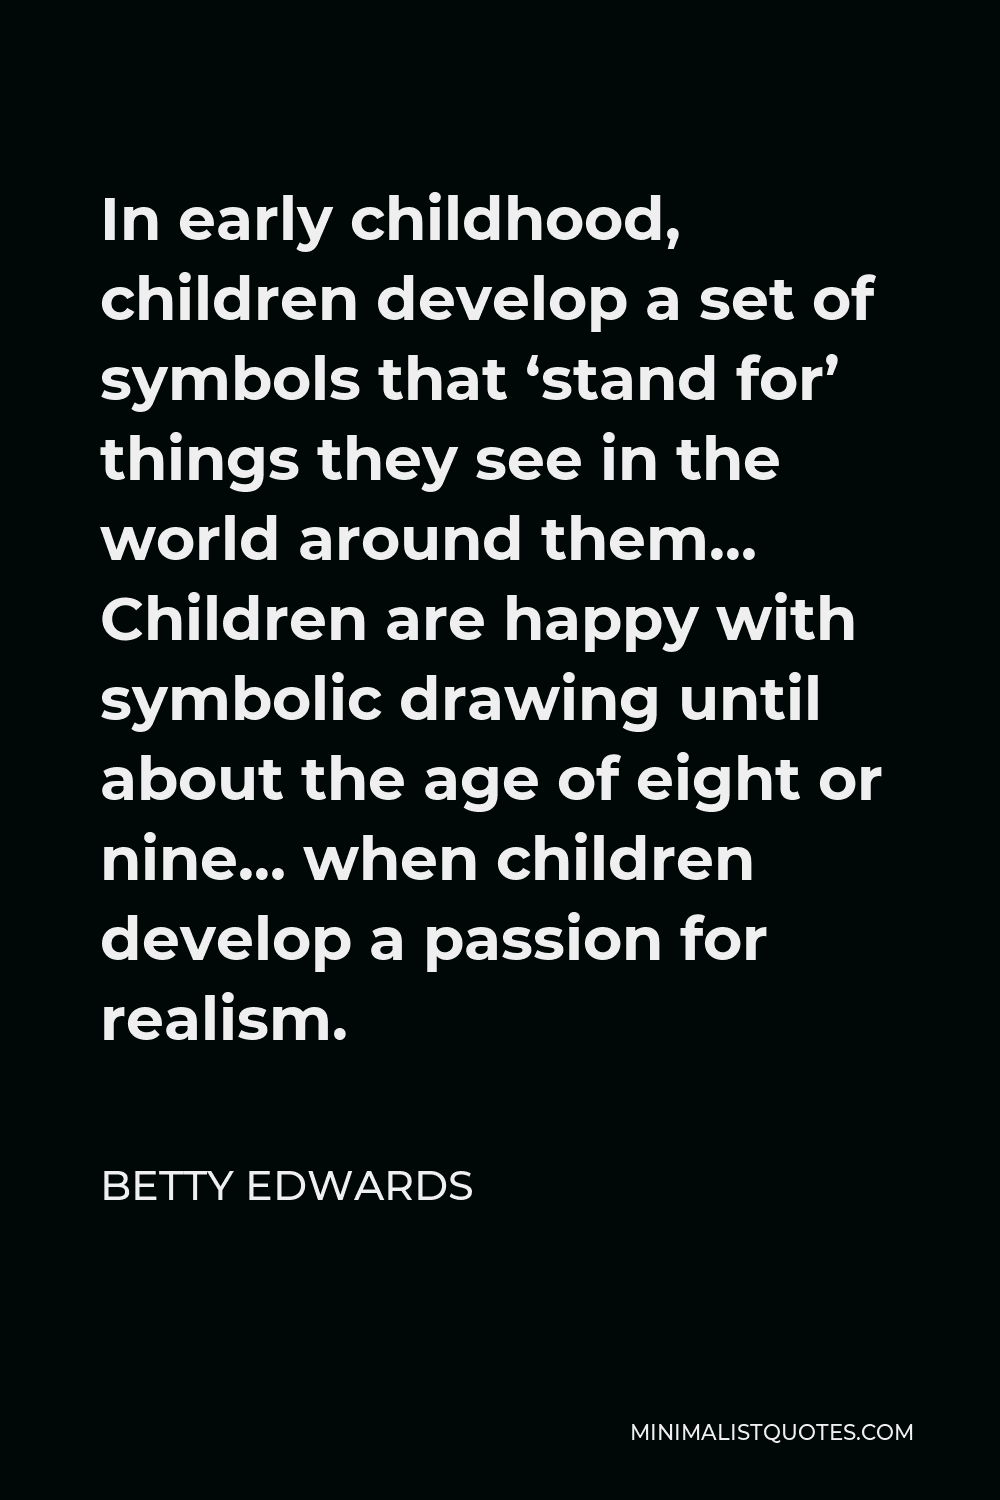 Betty Edwards Quote - In early childhood, children develop a set of symbols that ‘stand for’ things they see in the world around them… Children are happy with symbolic drawing until about the age of eight or nine… when children develop a passion for realism.